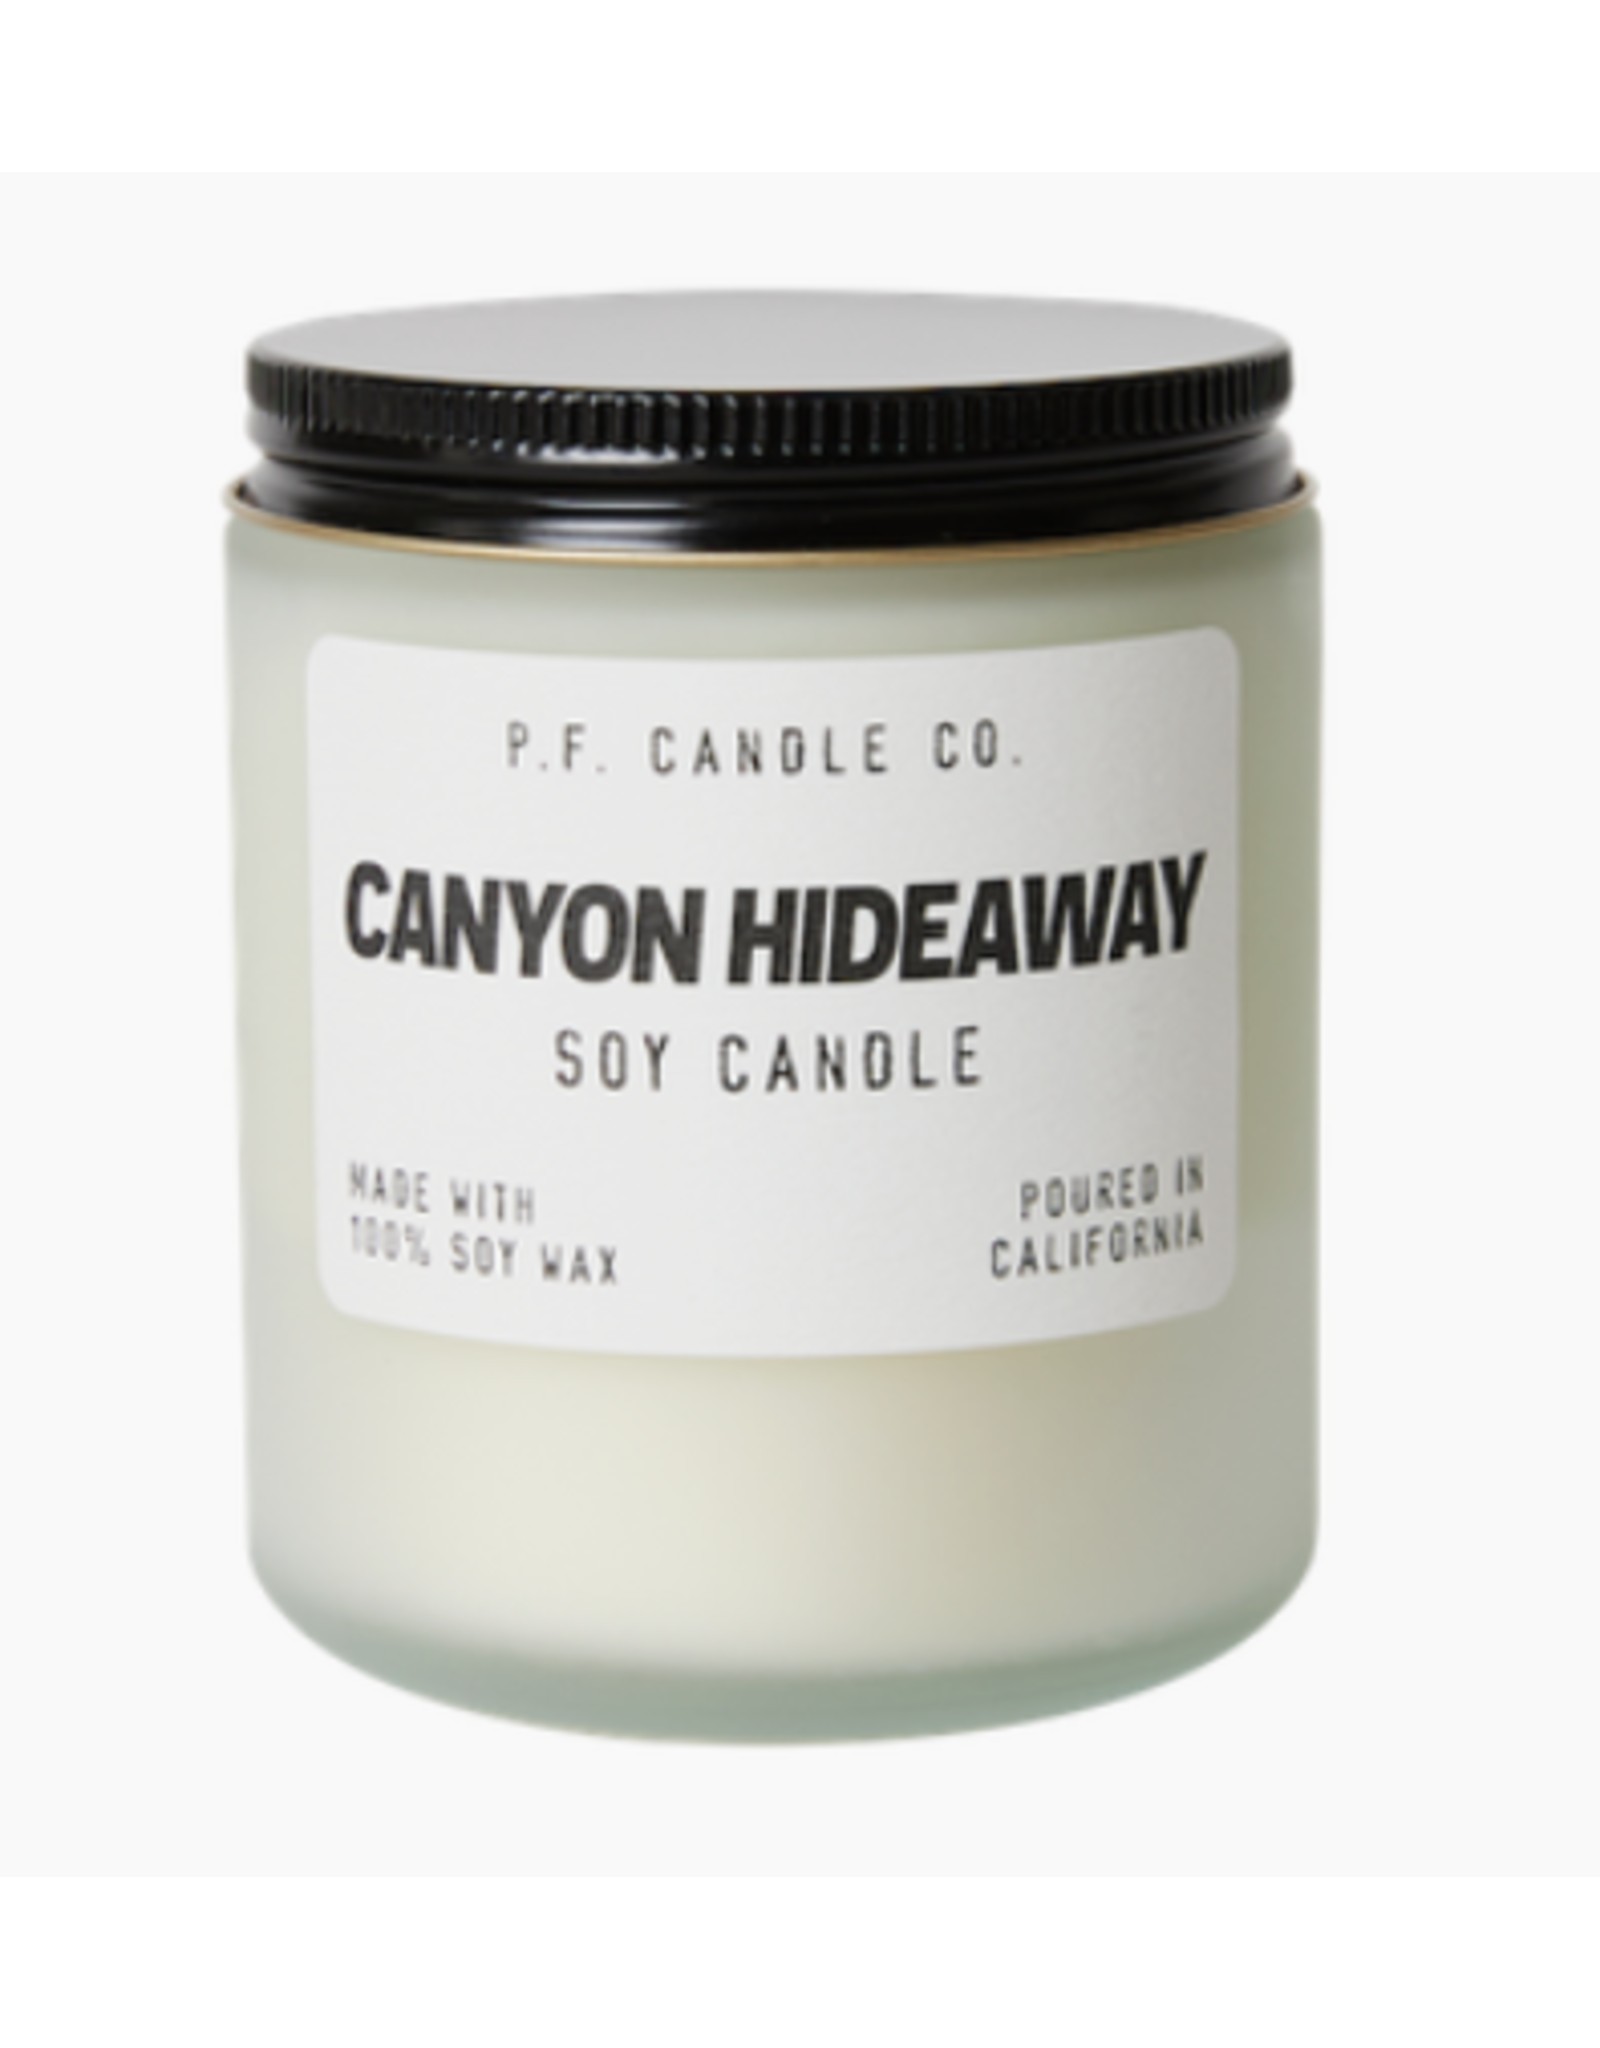 7.2oz Soy Candle - Canyon Hideaway